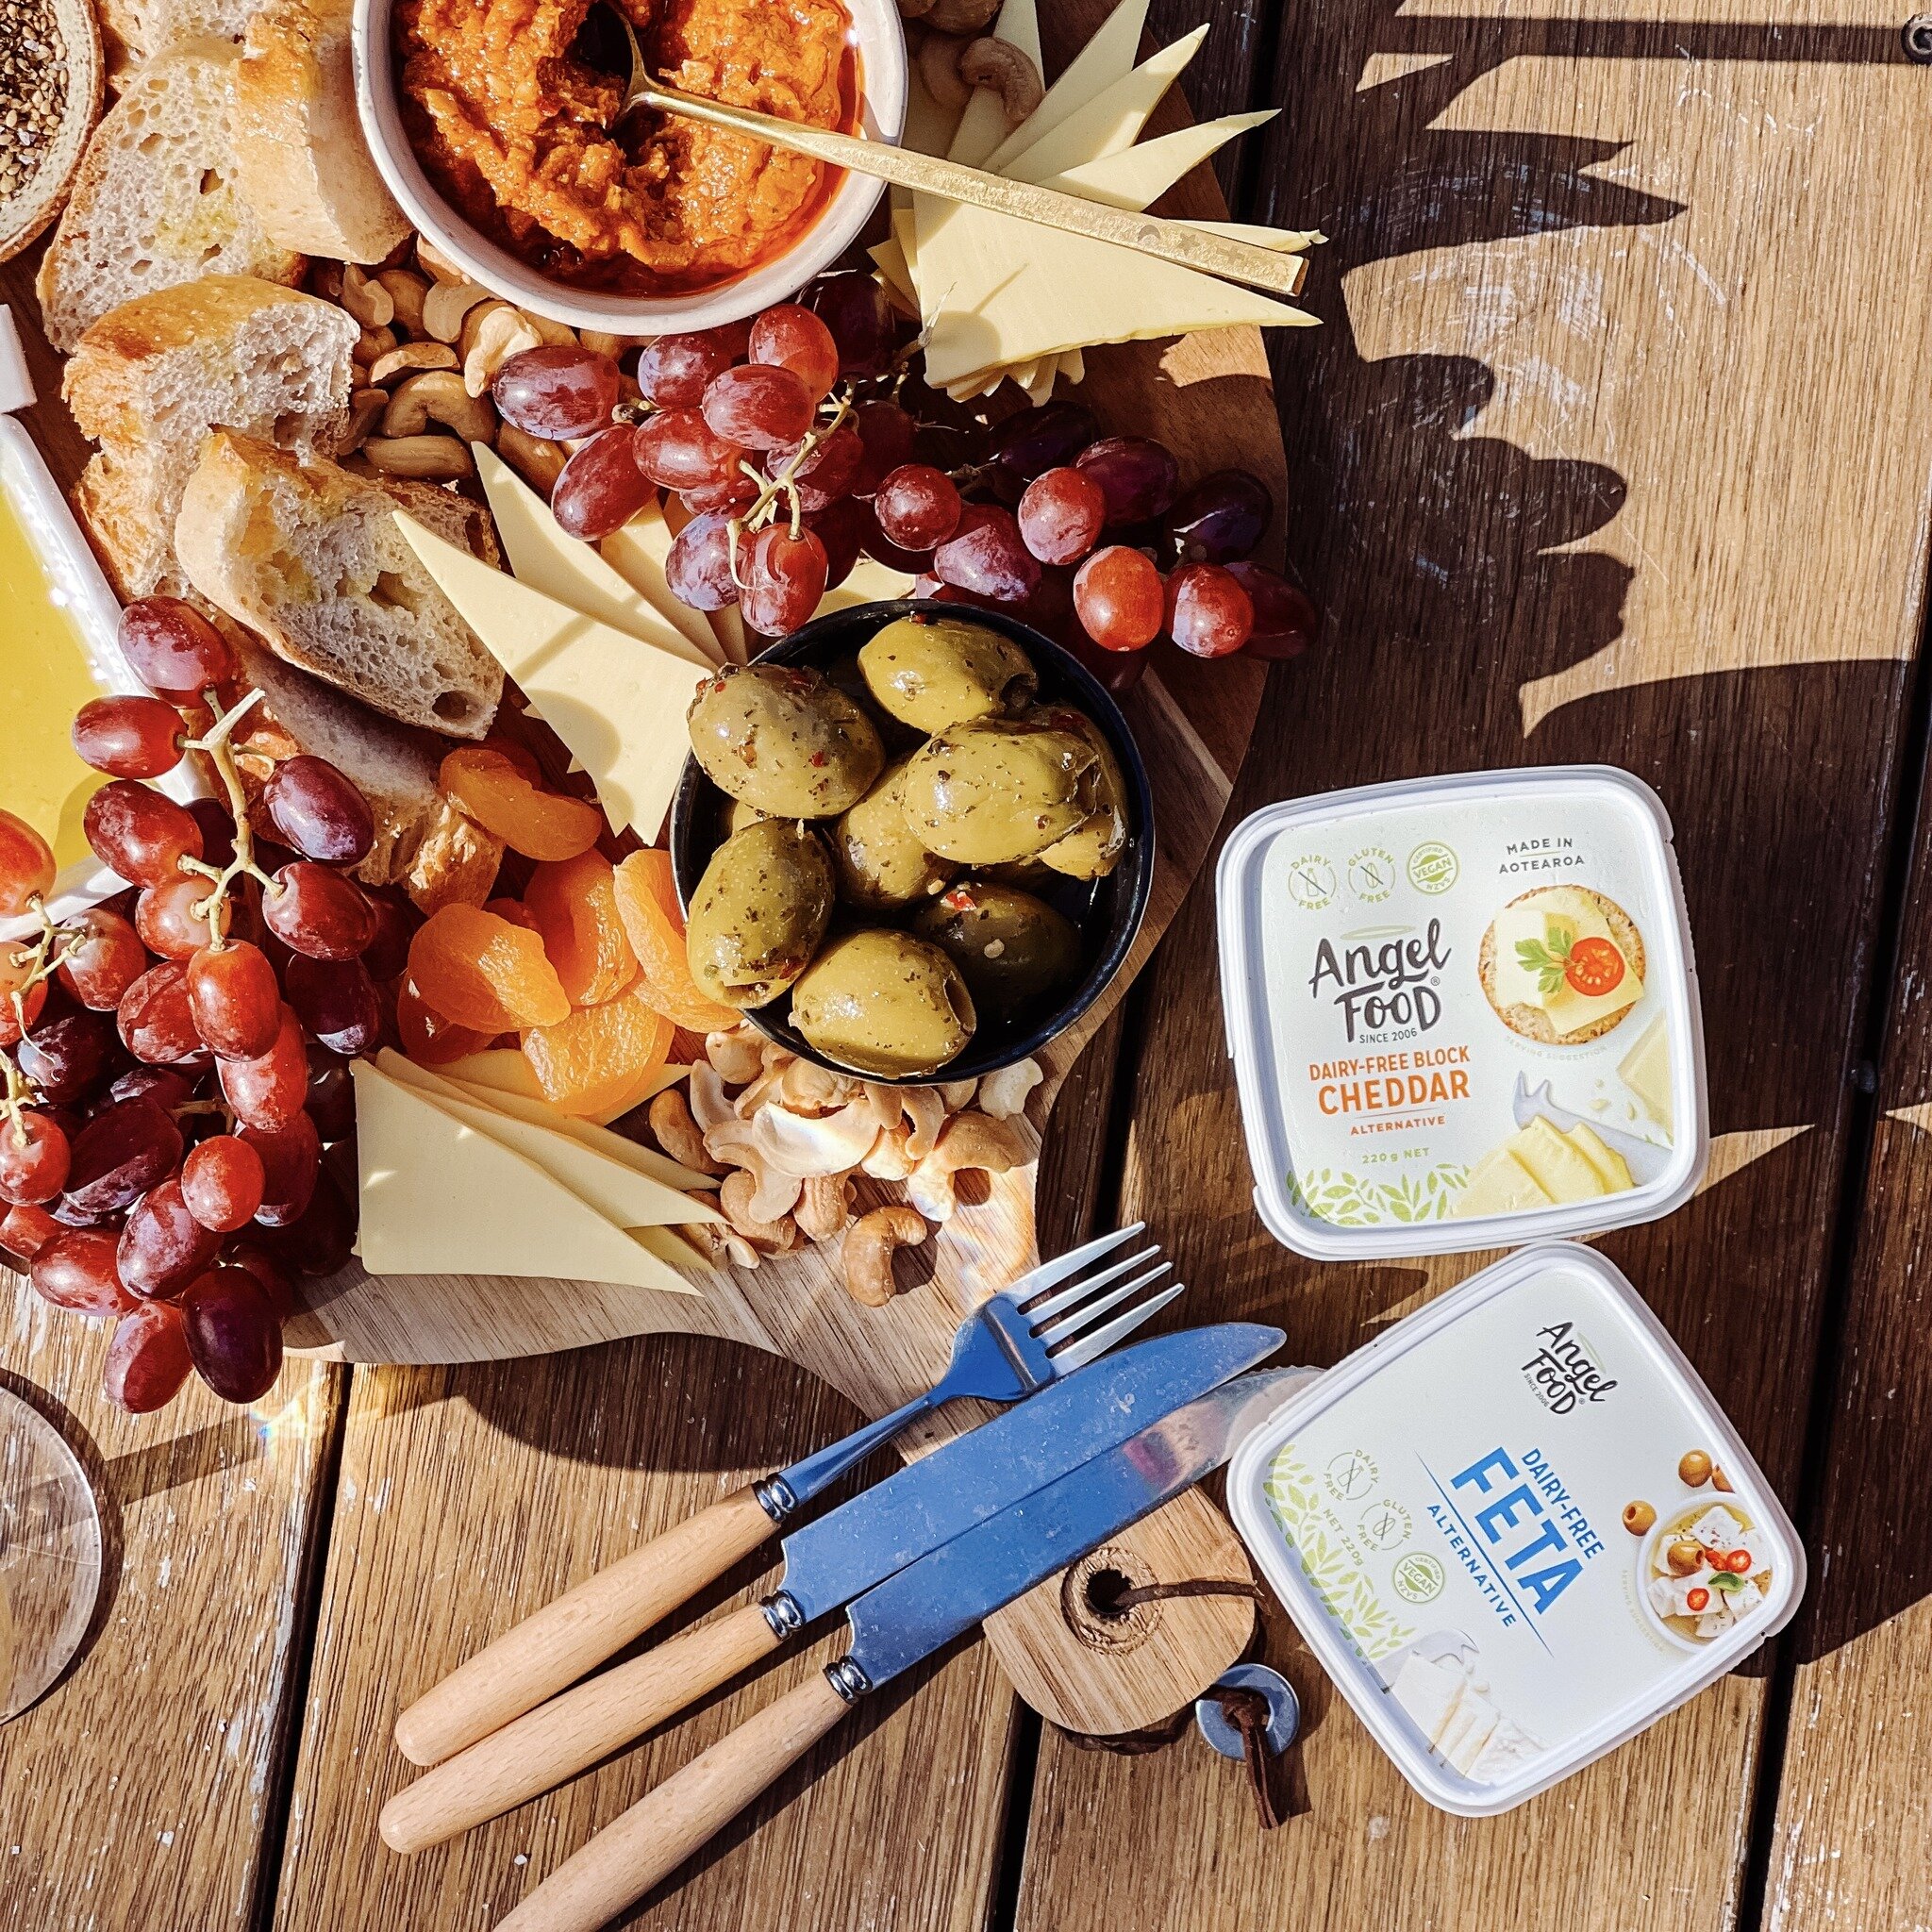 Gotta make the most of the lovely autumn weather with a picnic in the backyard, on the balcony or at the beach. Gather up those plant-based goodies and your favourite humans, and relaxxxxxx!